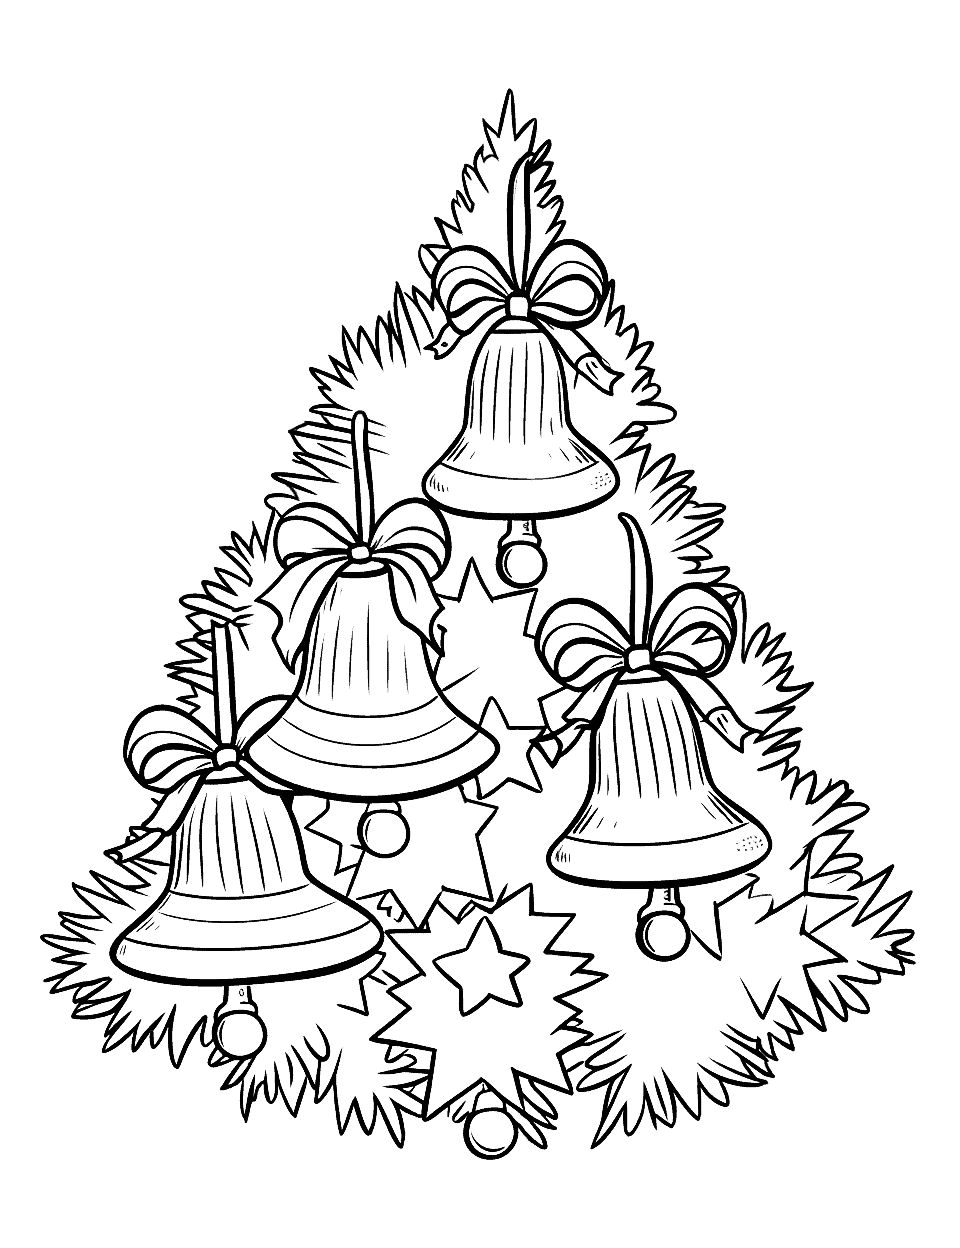 Carol of the Bells Christmas Coloring Page - Beautiful bells ringing out Christmas carols.